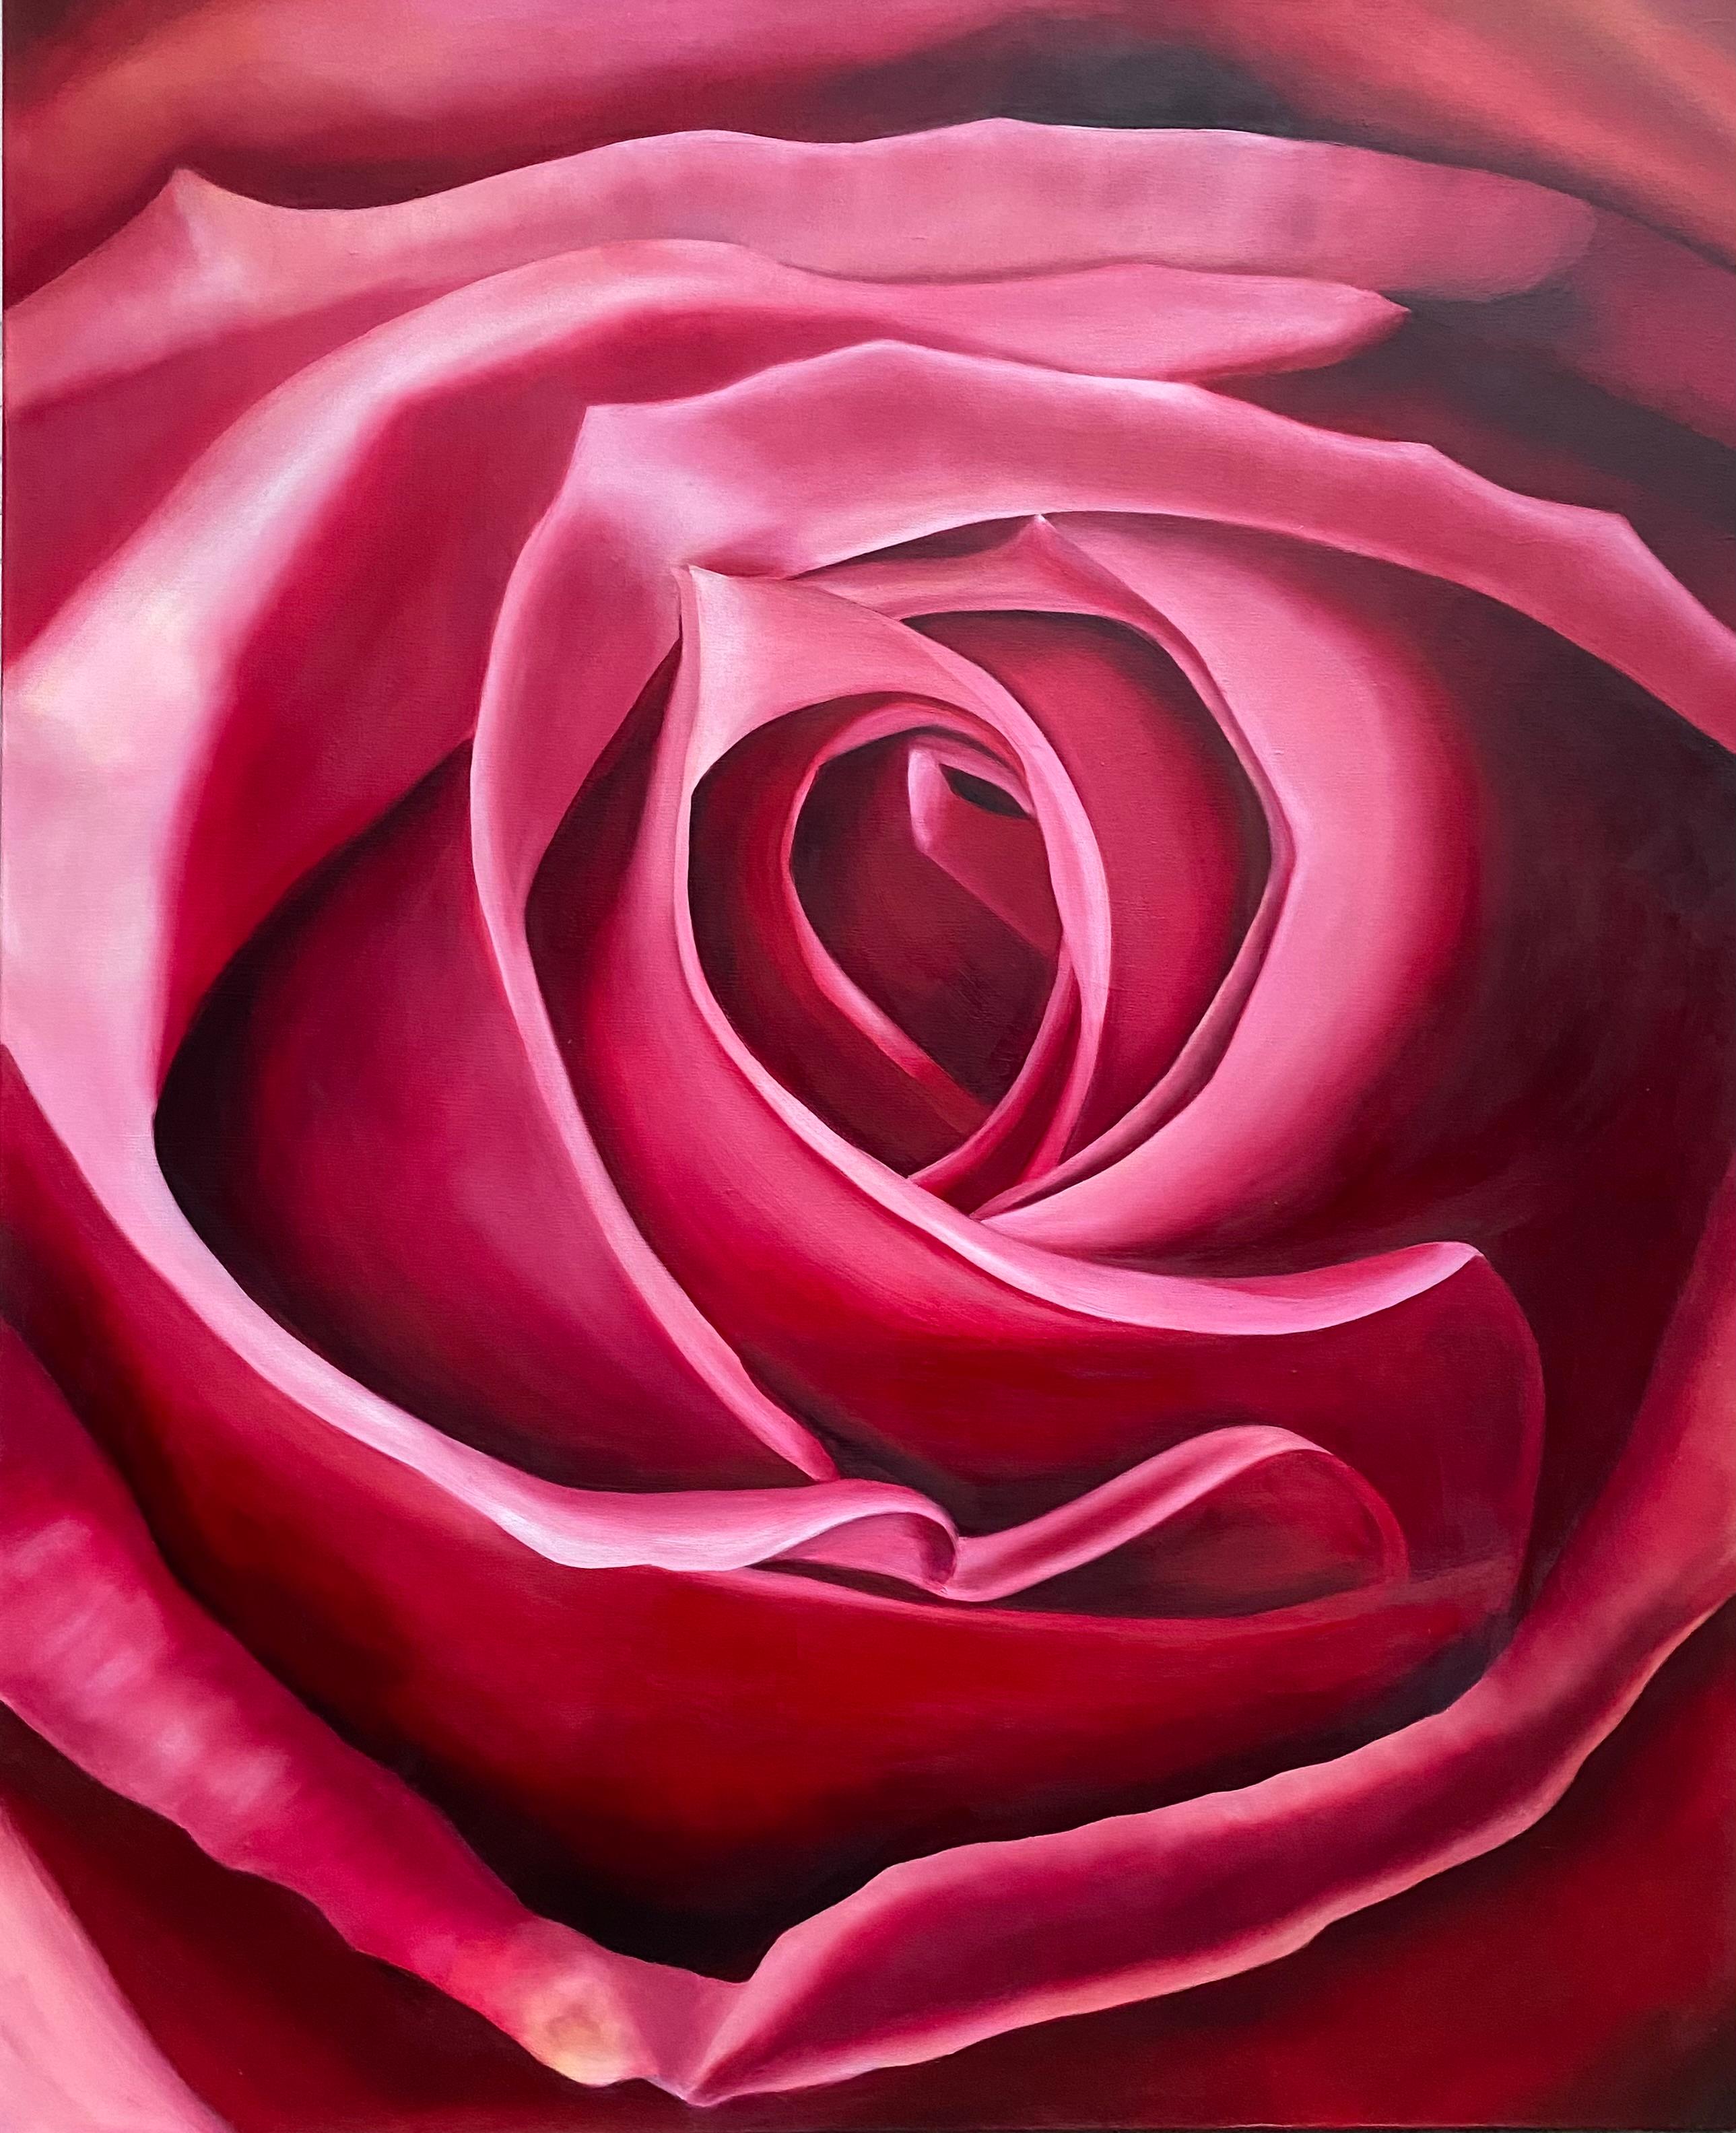 Susan Meeks Still-Life Painting - Rose  Realism Oil on Canvas    Gallery Wrapped Floral 54 x 44  Valentines